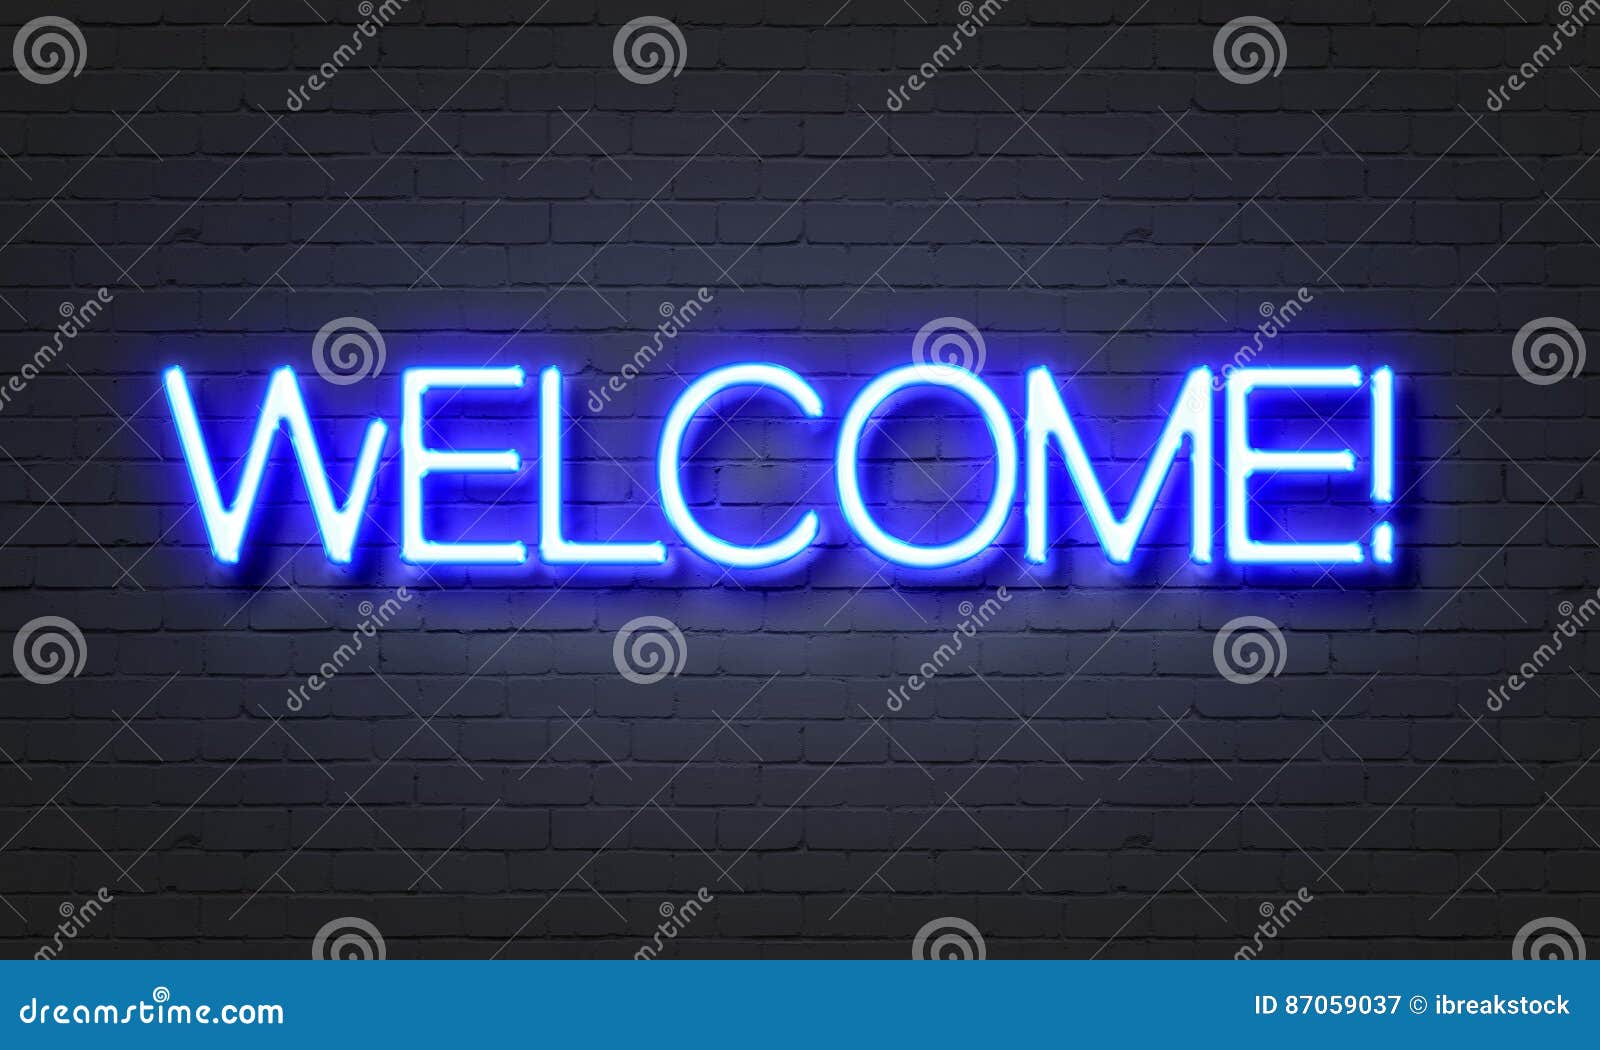 Welcome is steam фото 6